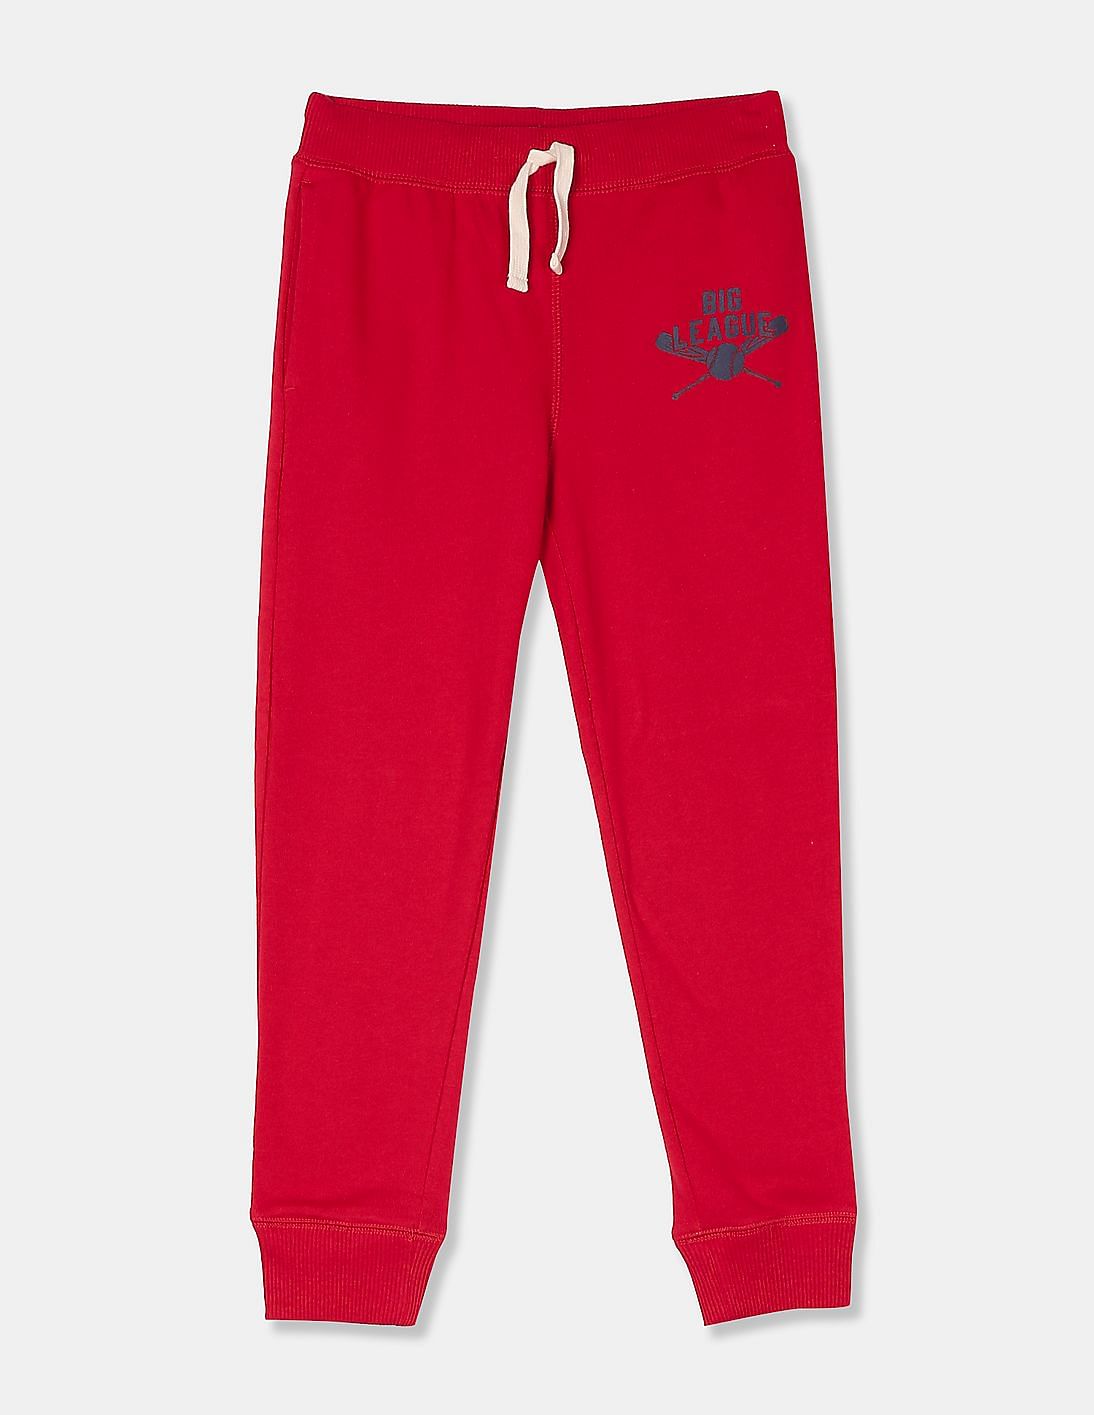 Buy The Children's Place Boys Boys Red Drawstring Waist Solid Joggers ...